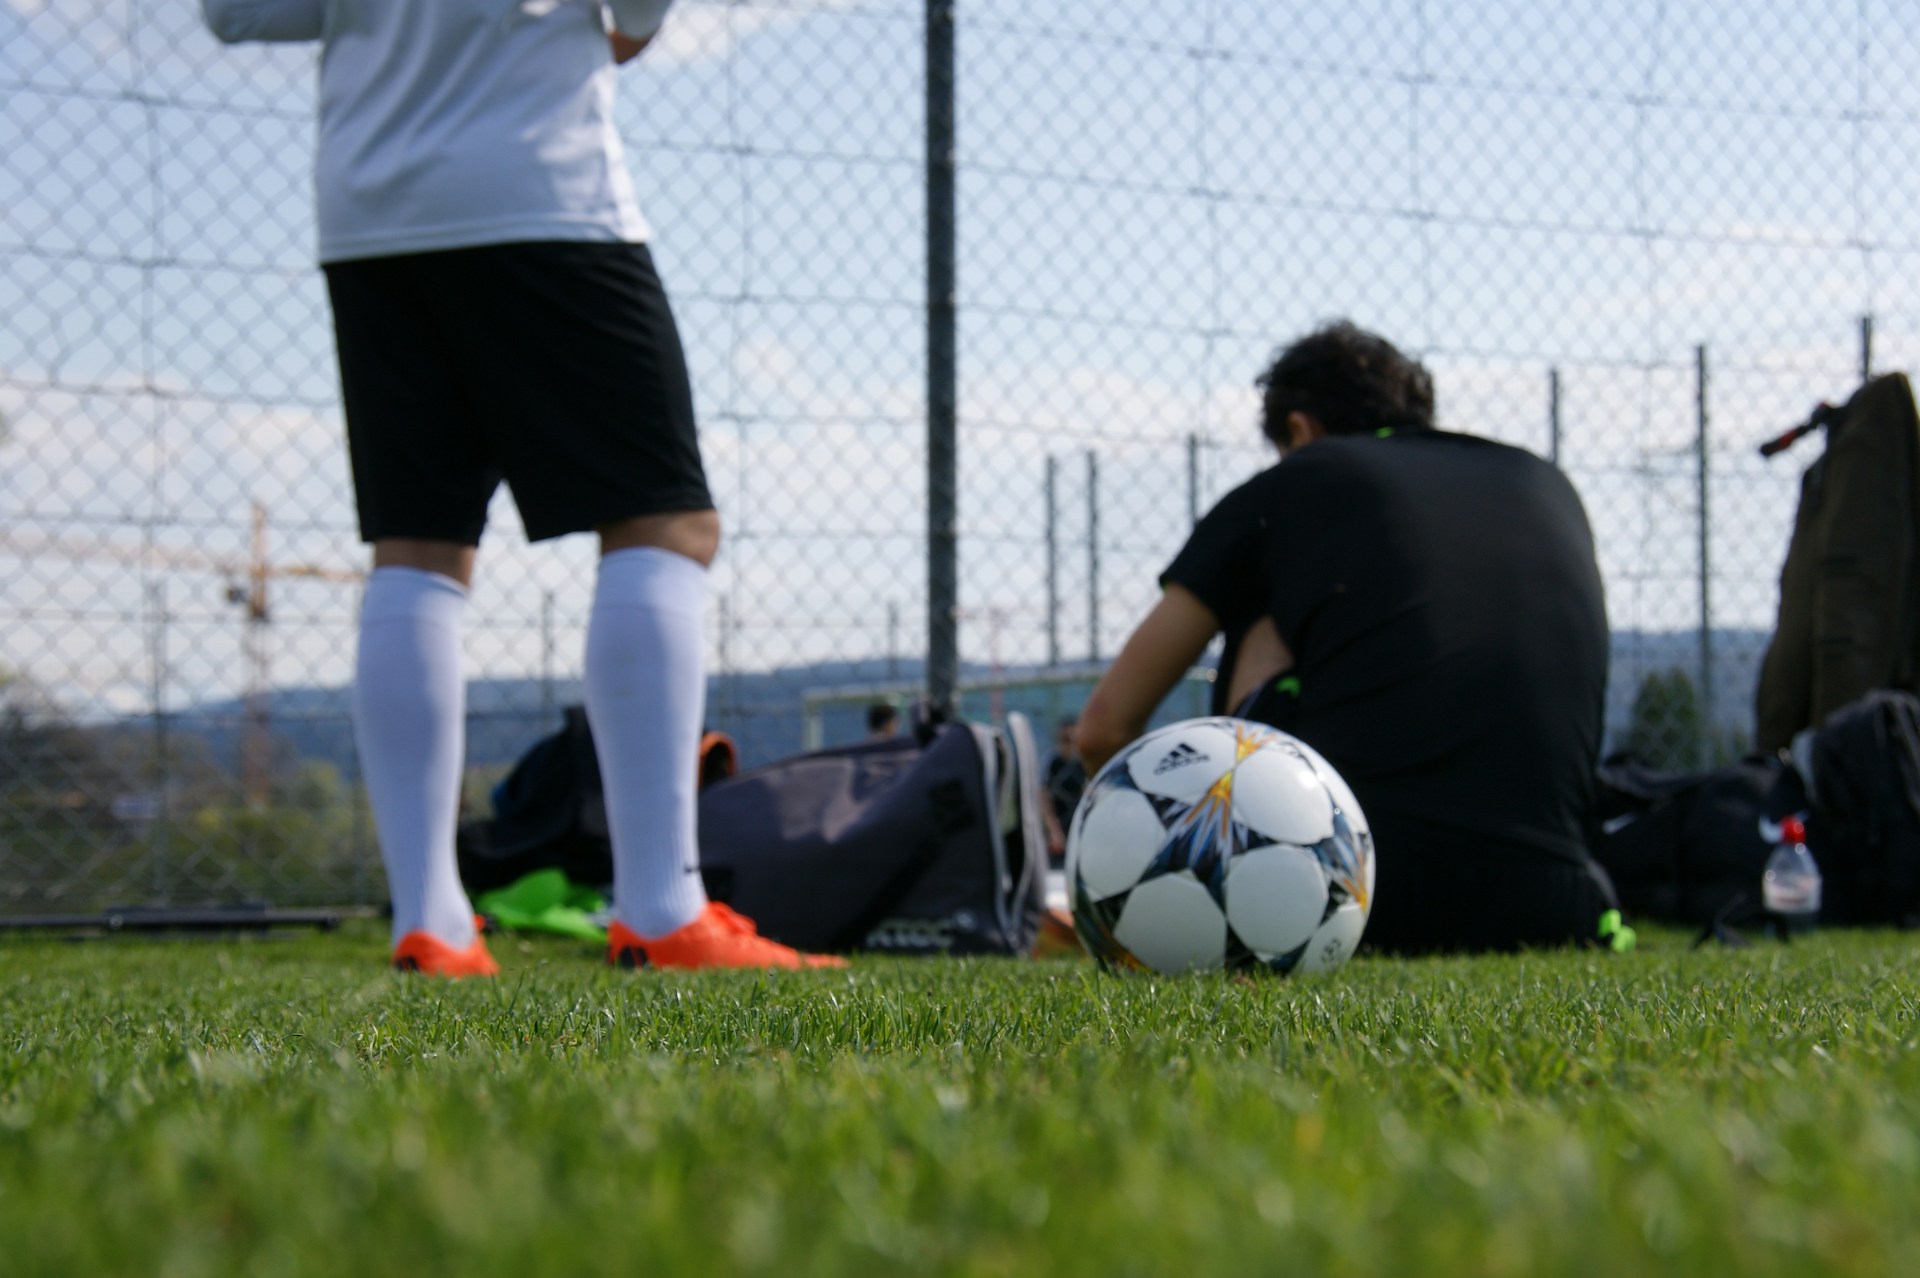 Betting on football matches: assessing players and coaches